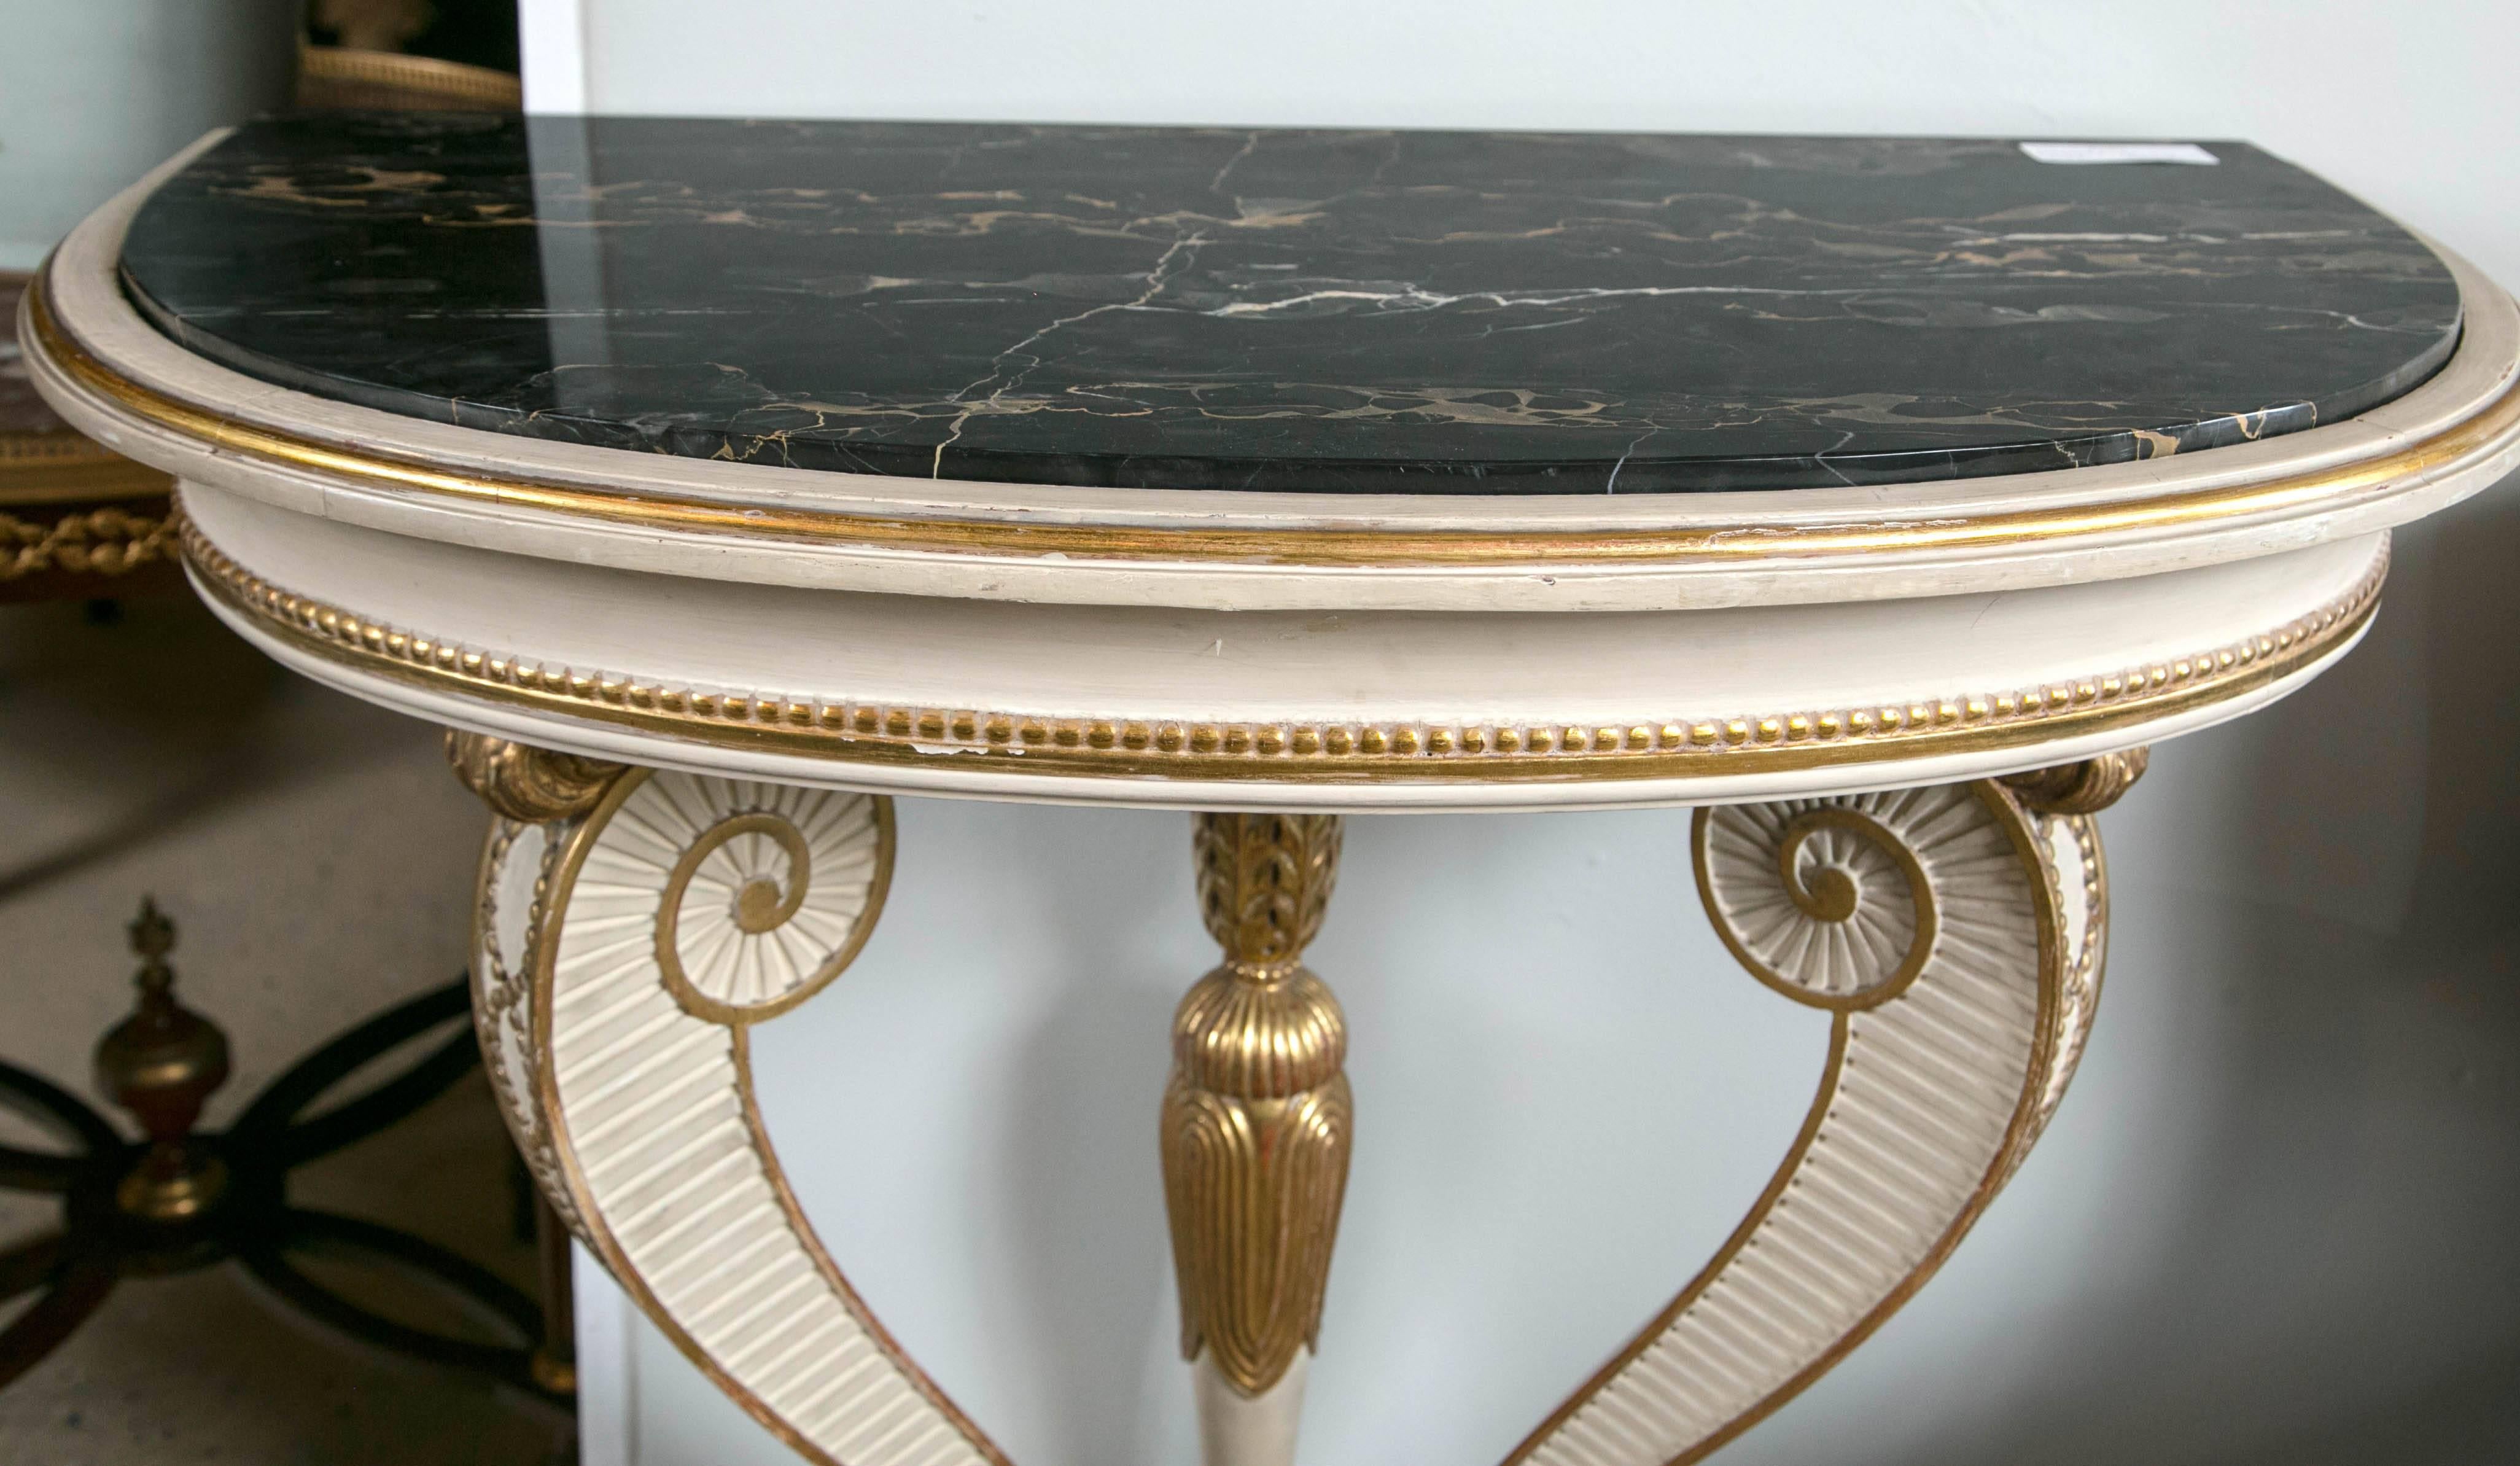 Maison Jansen marble-top paint and parcel gilt demilune console. Exquisite and fine design by Maison Jansen with Lion's Paw feet sitting on a crème painted base. The center base is beautifully detailed highlighting a gilded center tassel leading